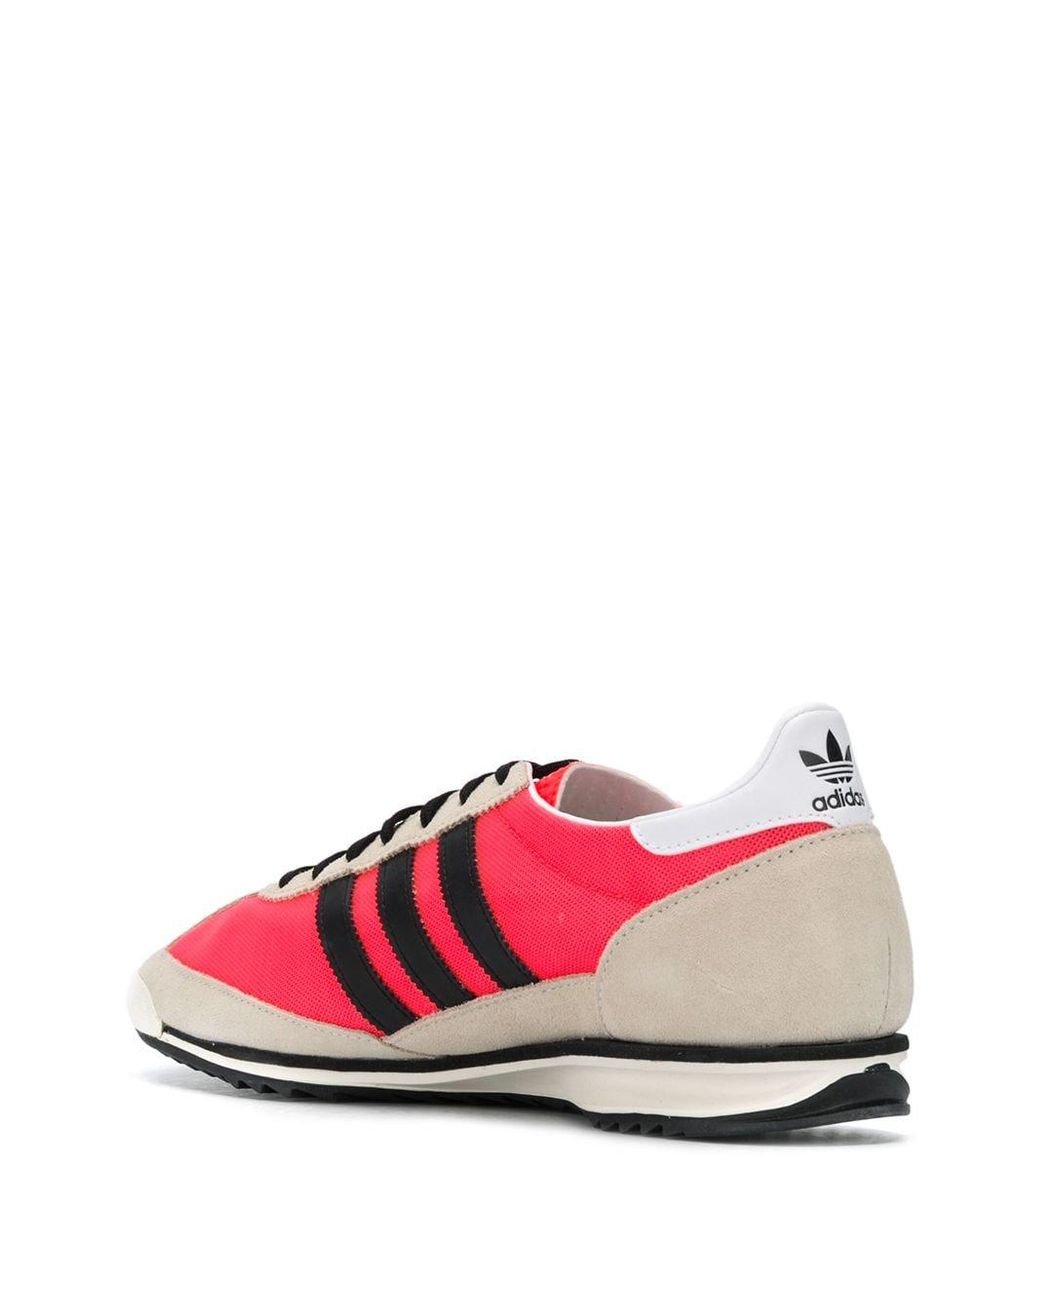 adidas Rubber Sl 71 Low-top Trainers in 